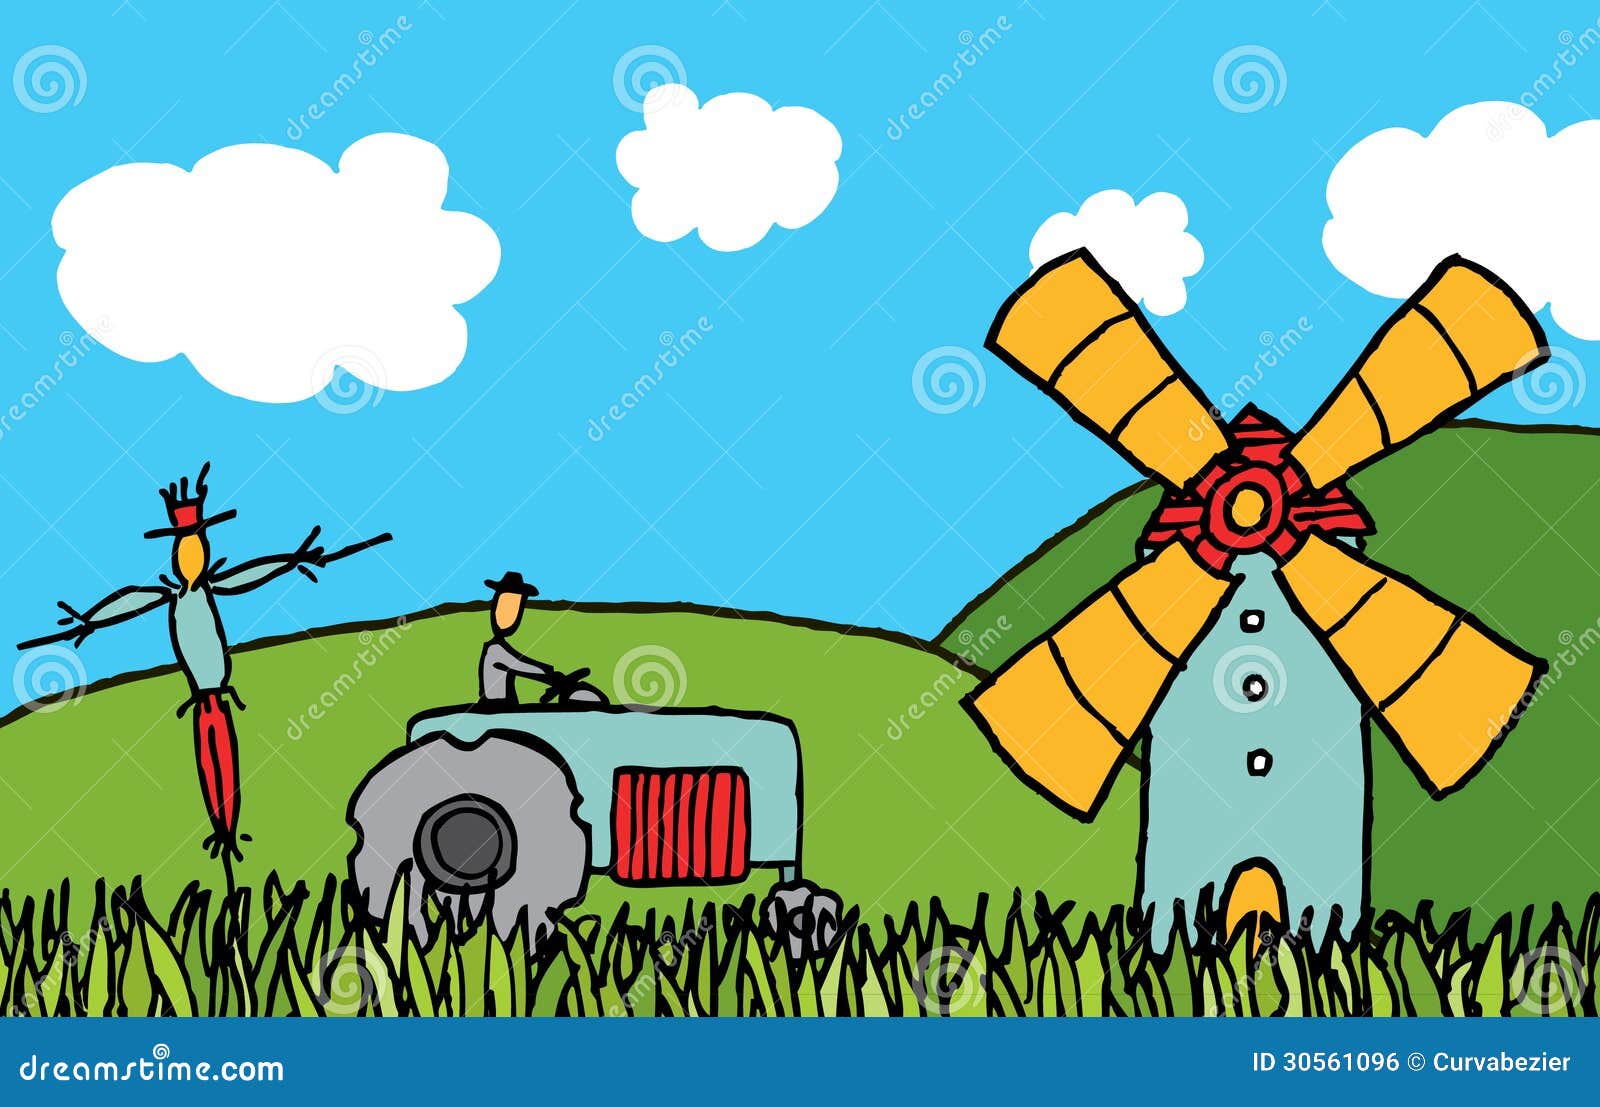 Cartoon Country Field Royalty Free Stock Image - Image: 30561096